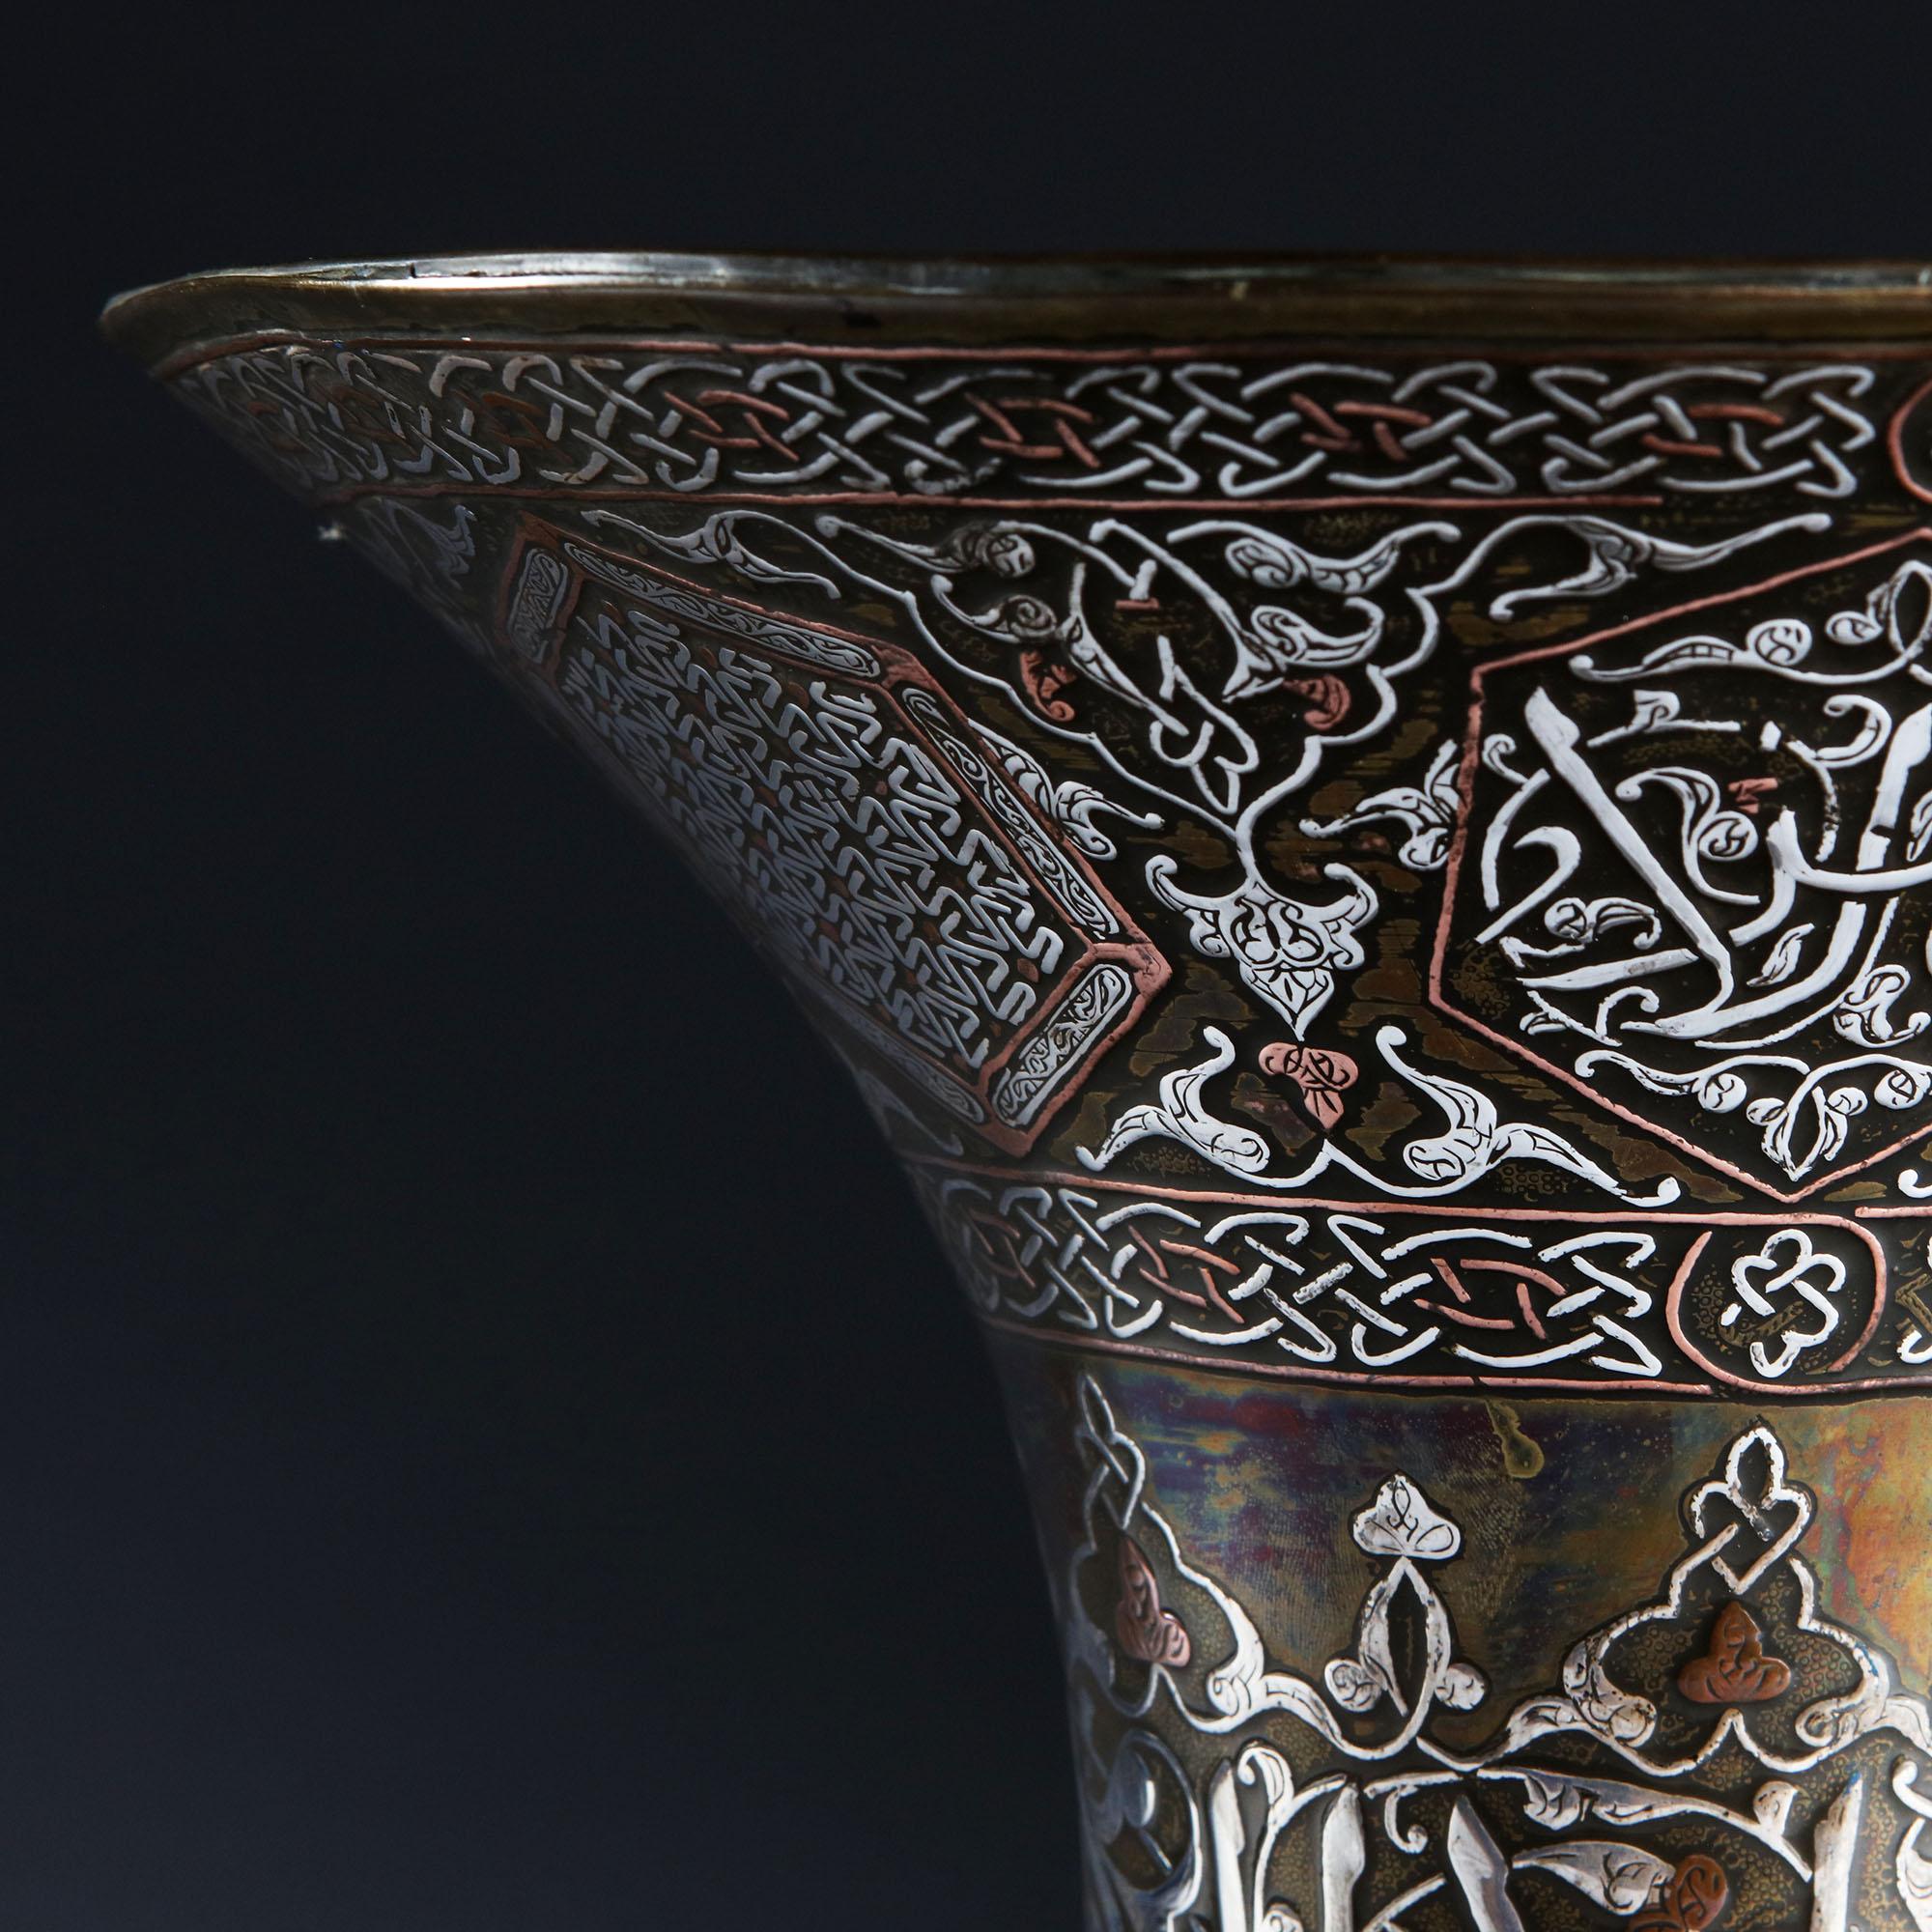 A 19th century Ottoman trumpet vase in silver, copper and brass, with flared neck and with Islamic script and pattern inlay throughout.